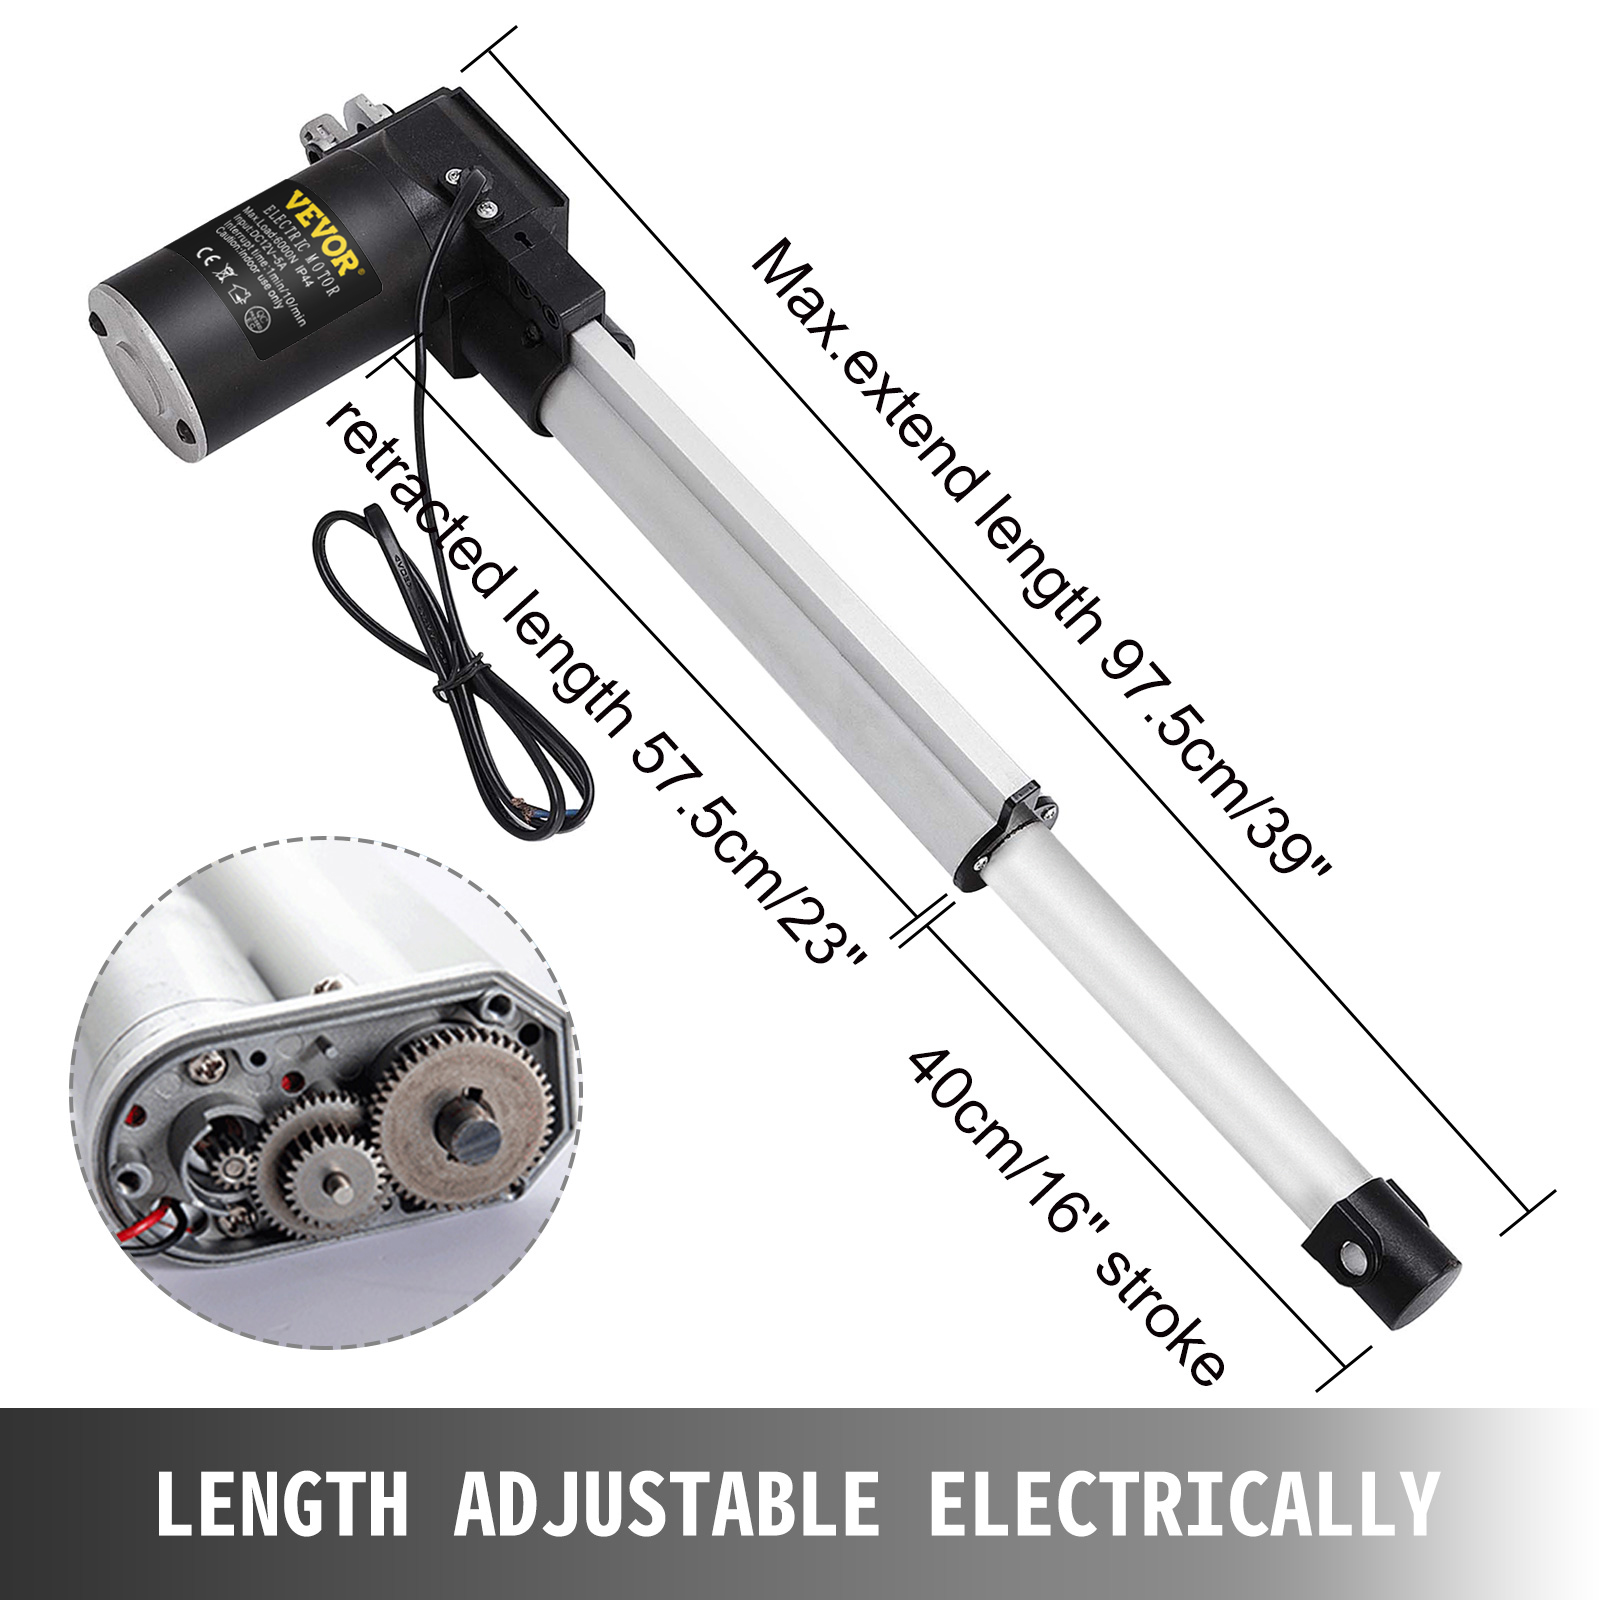 13.78",12VDC,1320LBS Linear Automatic Linear Motor New 12V Linear Actuator 